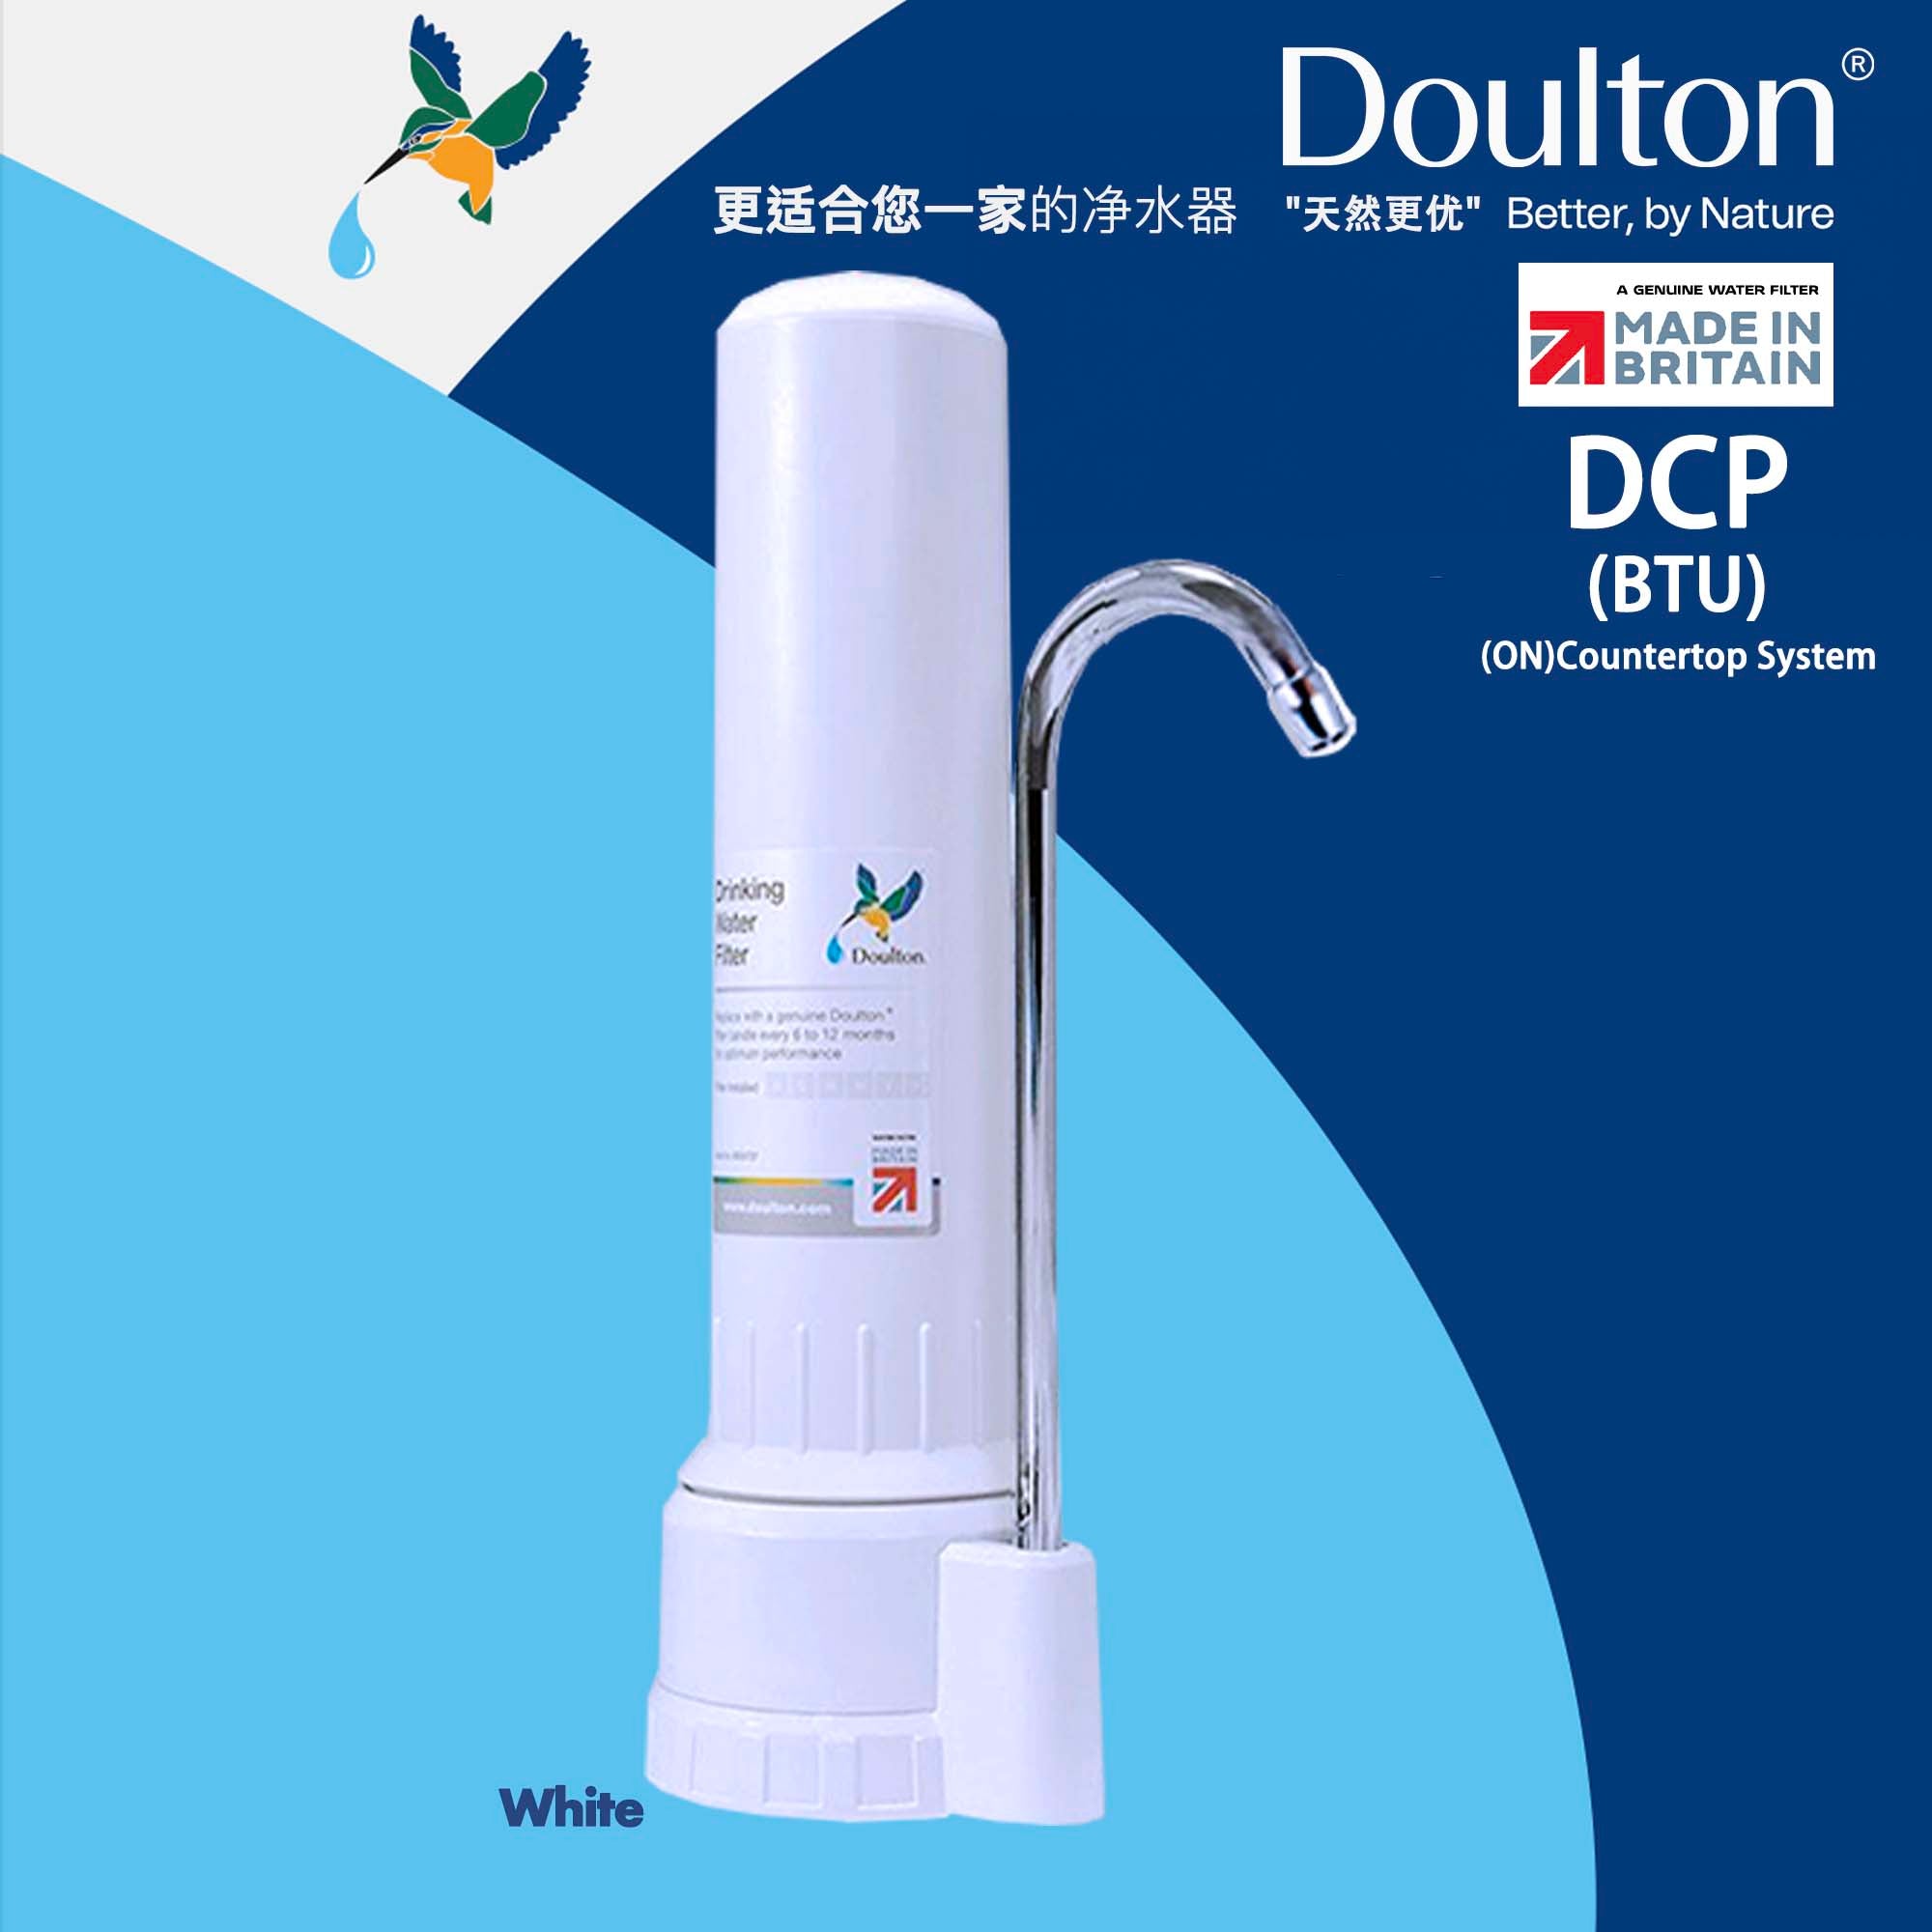 Doulton DCP Biotect Ultra Countertop Drinking Water Purifier: The Ultimate 4 stages of filtration System for Precision Filtration, Proudly Made in Britain Since 1826!